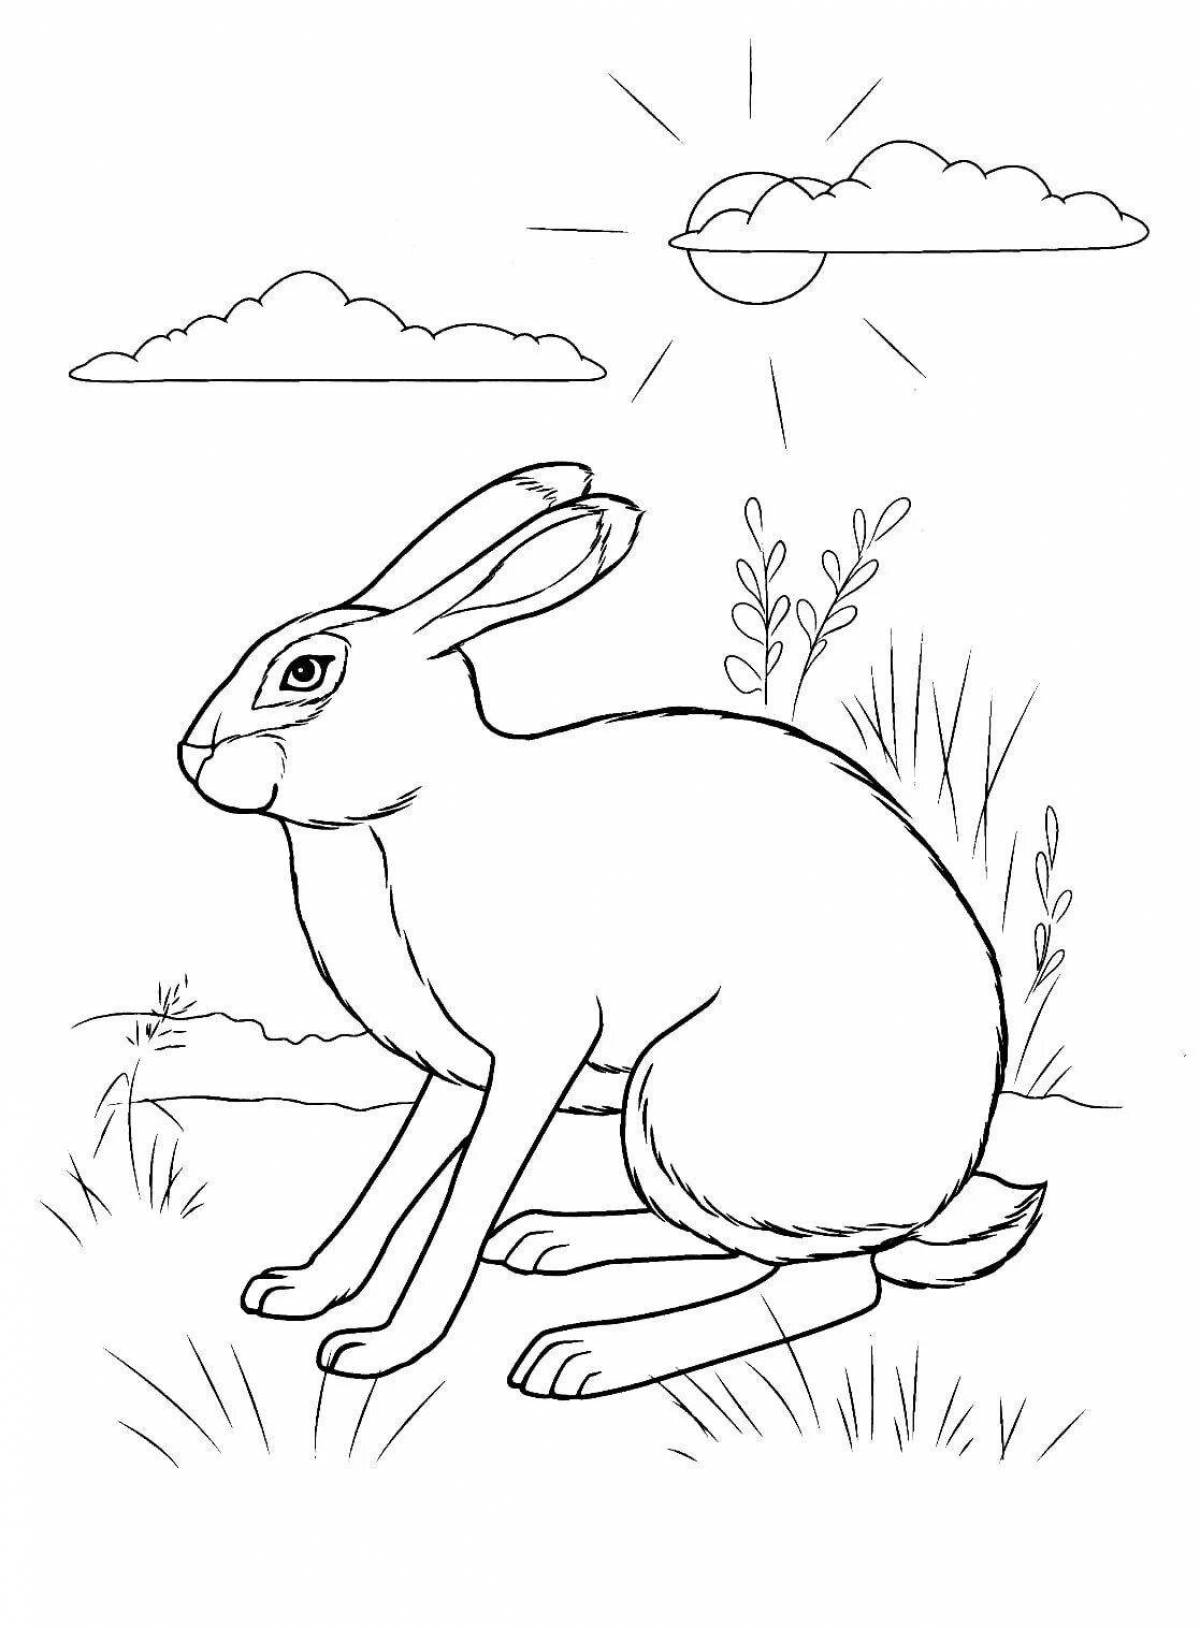 Attractive drawing of a hare